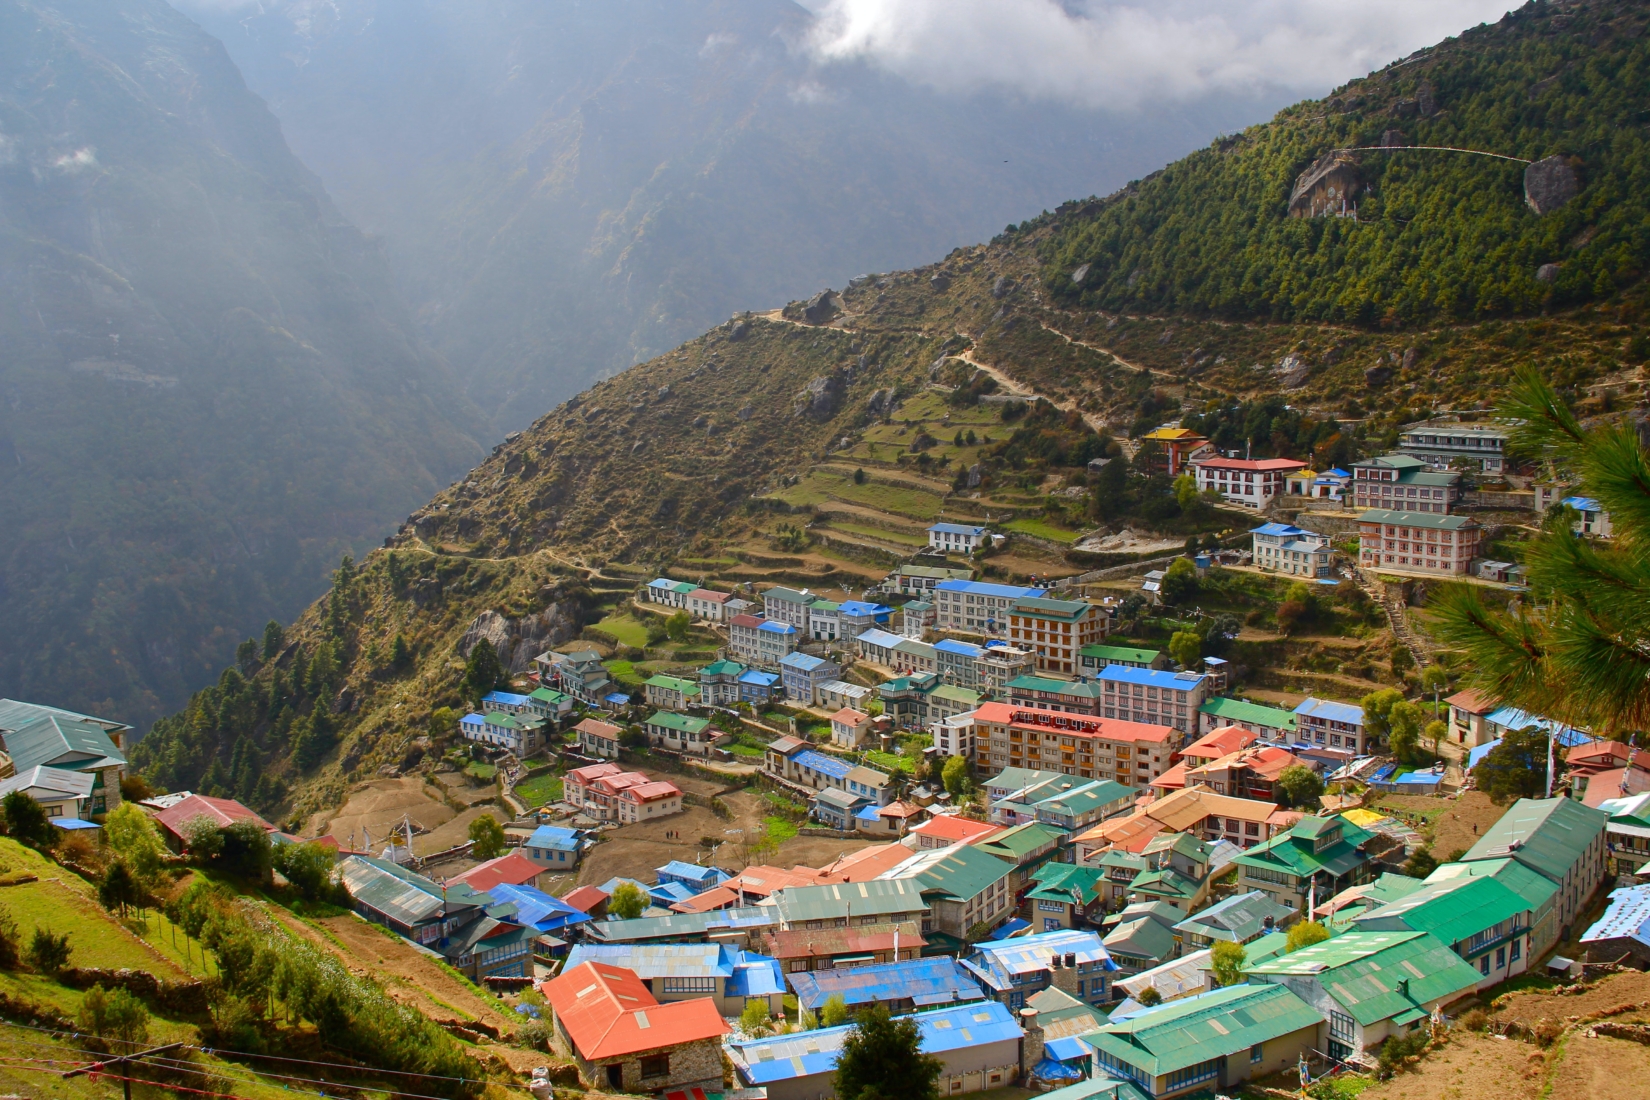 A photograph of Namche Bazaar, a market town and primary trading hub on the trail to Everest Base Camp in Nepal. The town of Namche Bazaar is built into the hillside